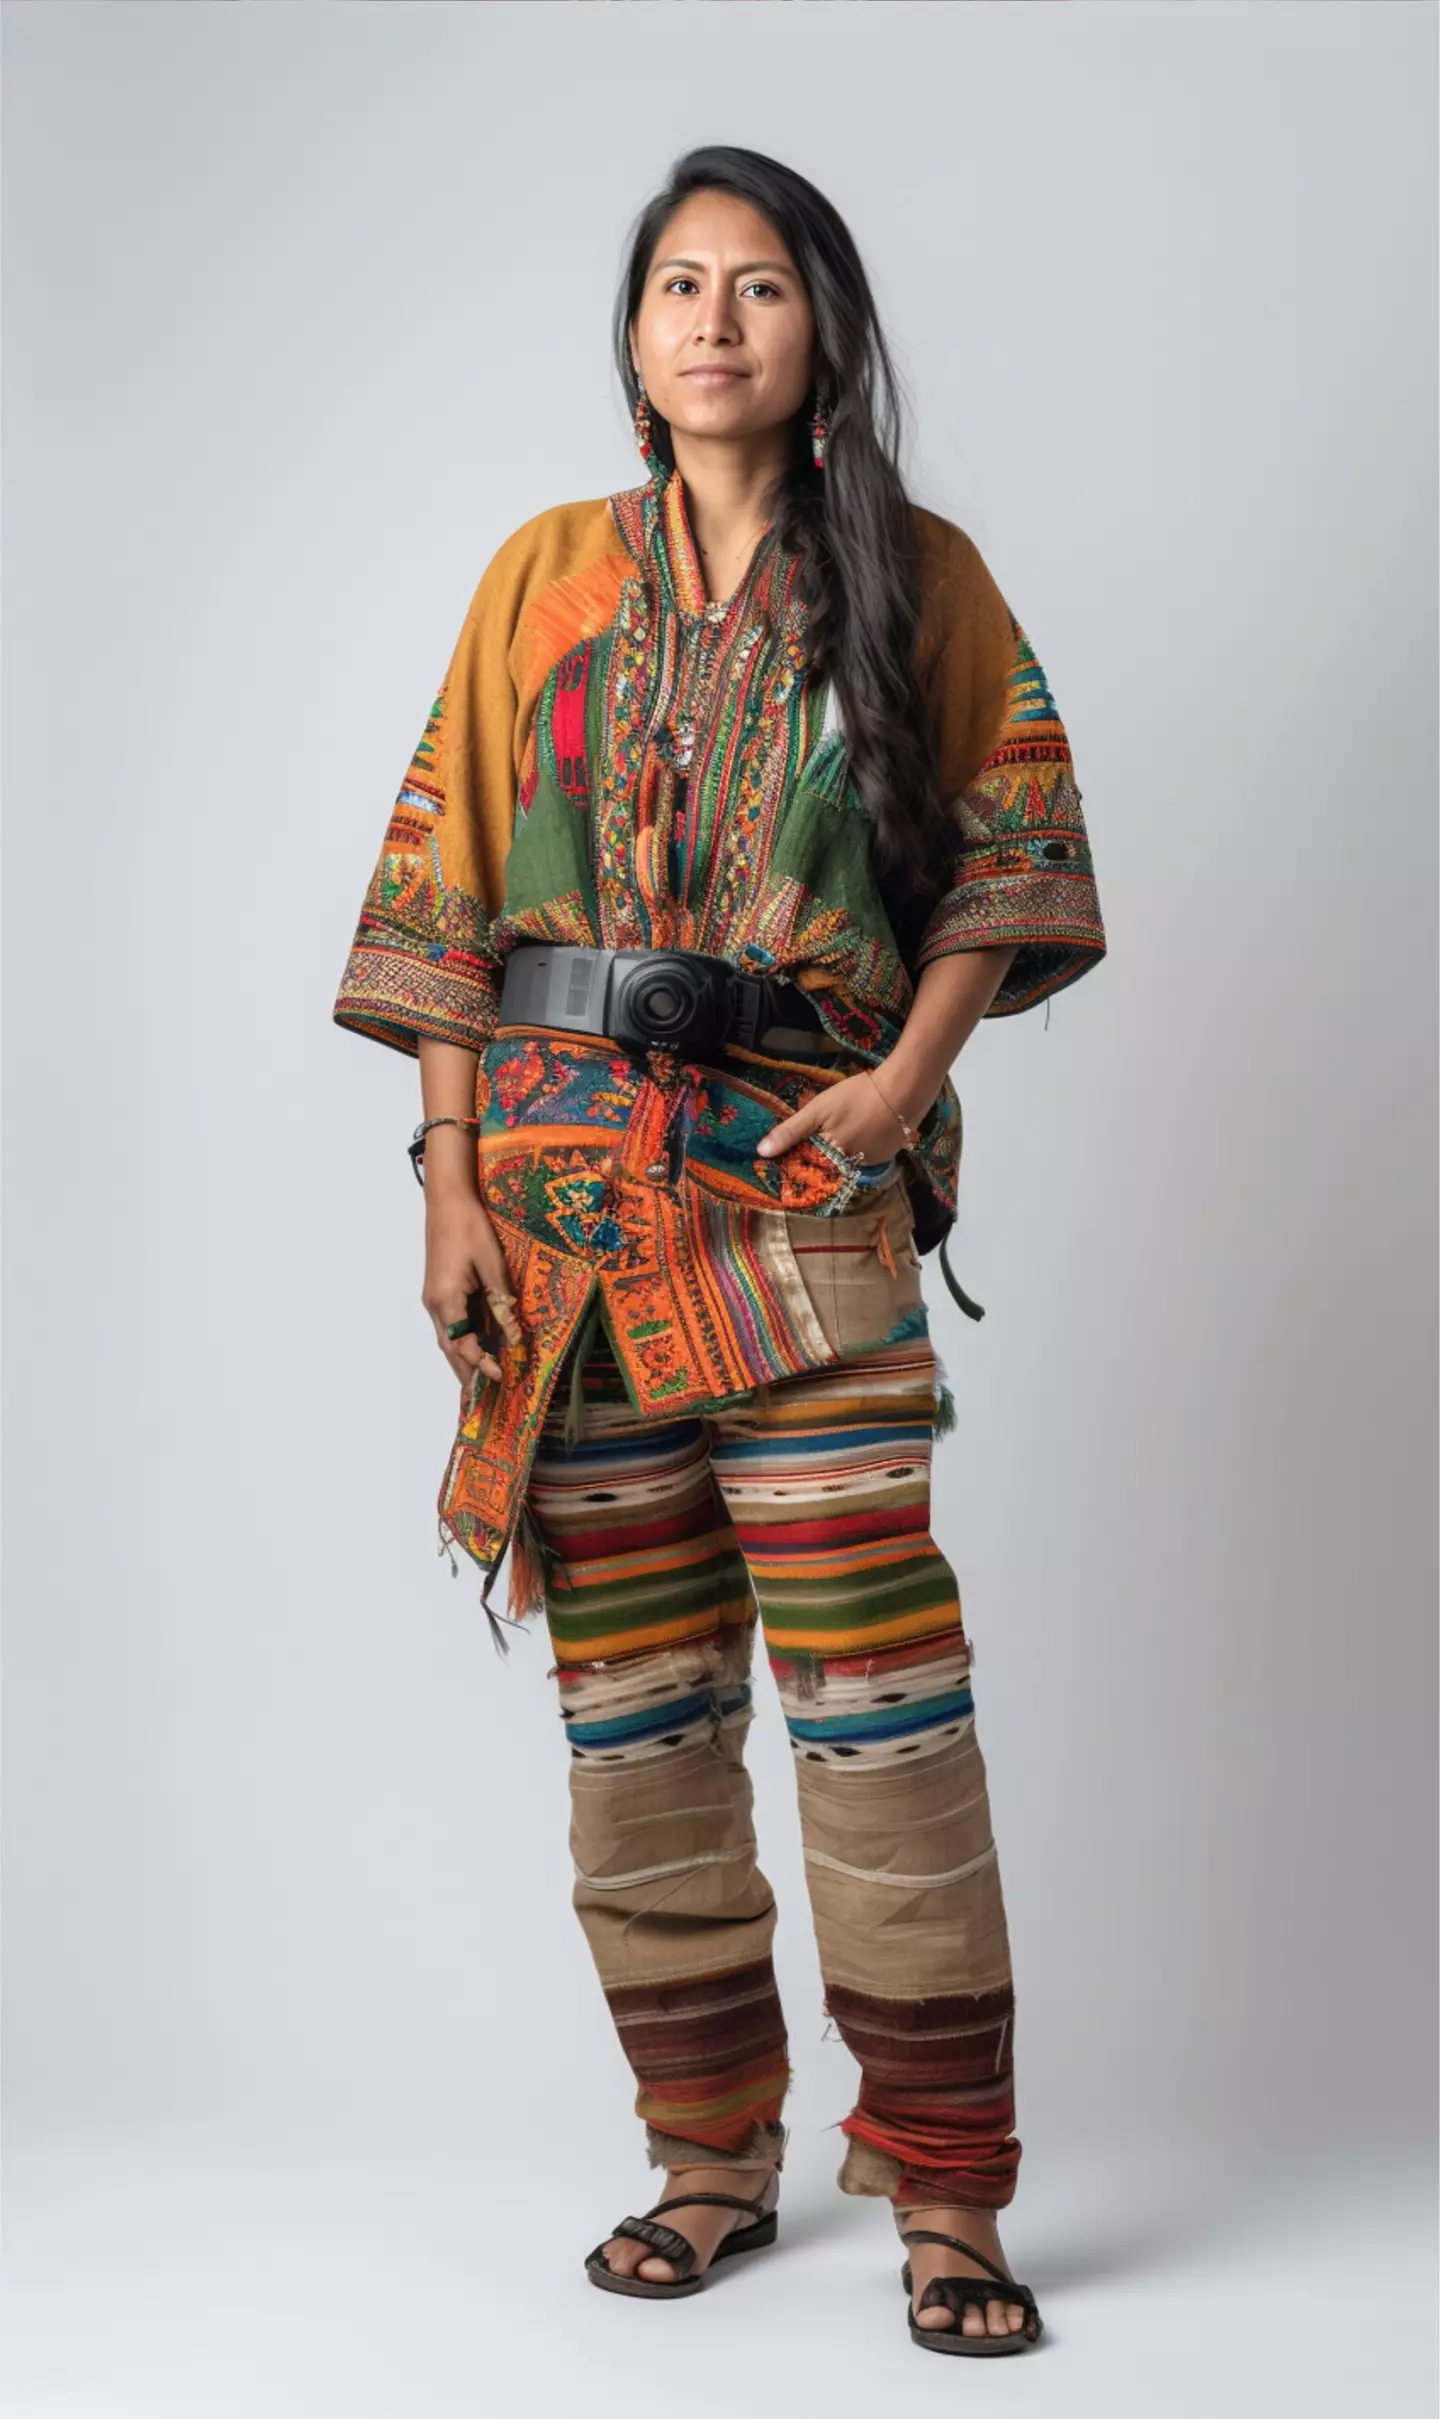 The images even incorporated elements of traditional dress, such as this AI-generated woman from Bolivia.